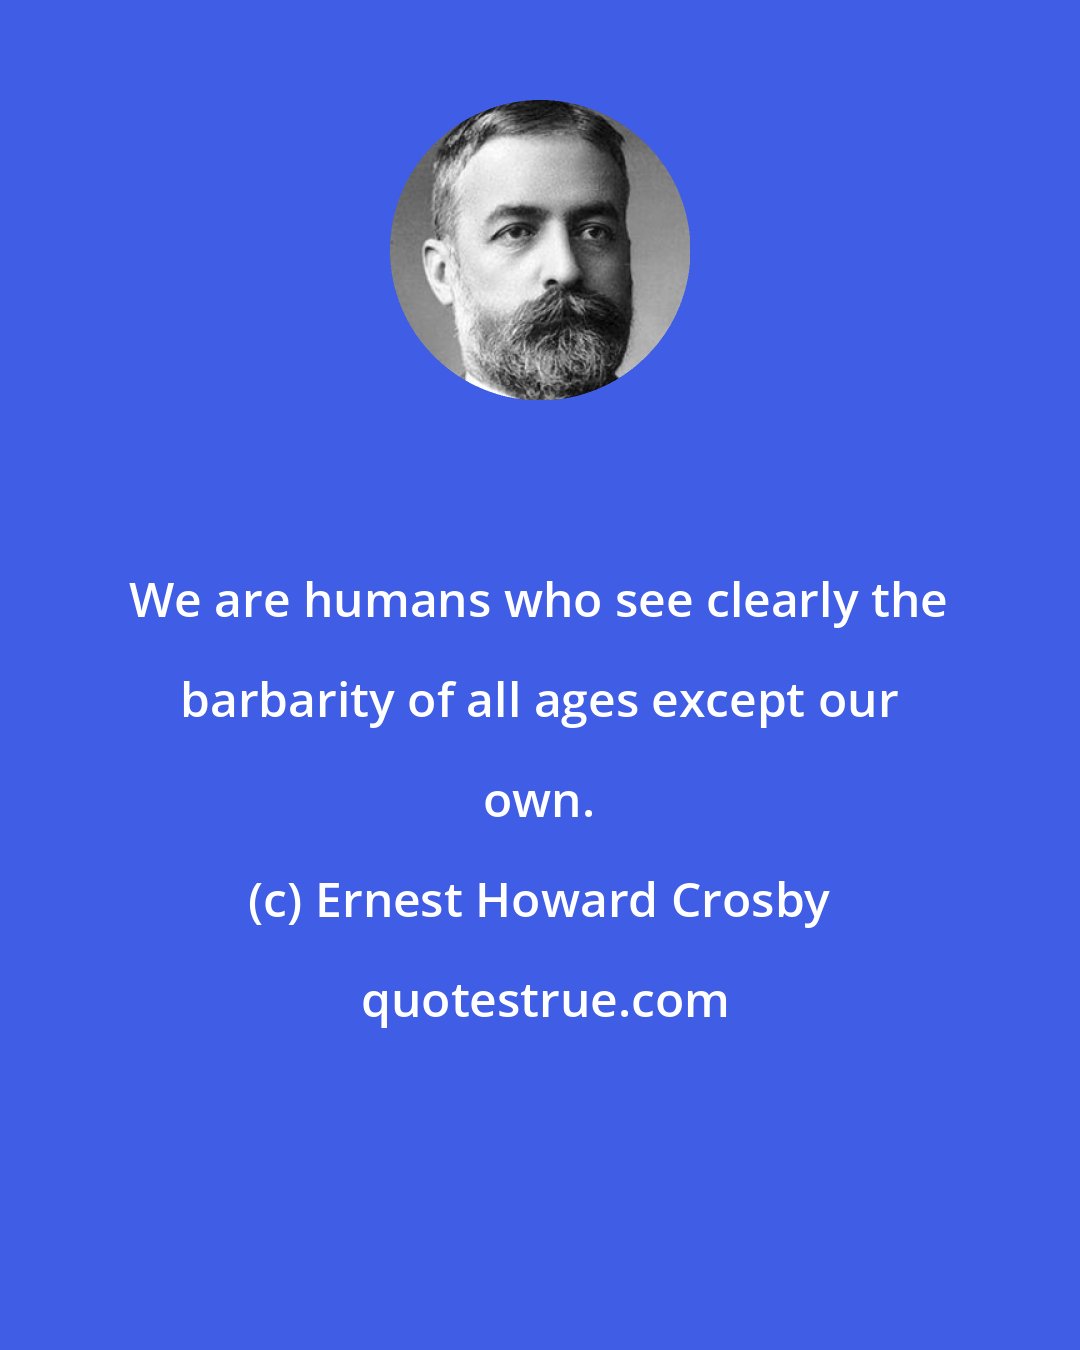 Ernest Howard Crosby: We are humans who see clearly the barbarity of all ages except our own.